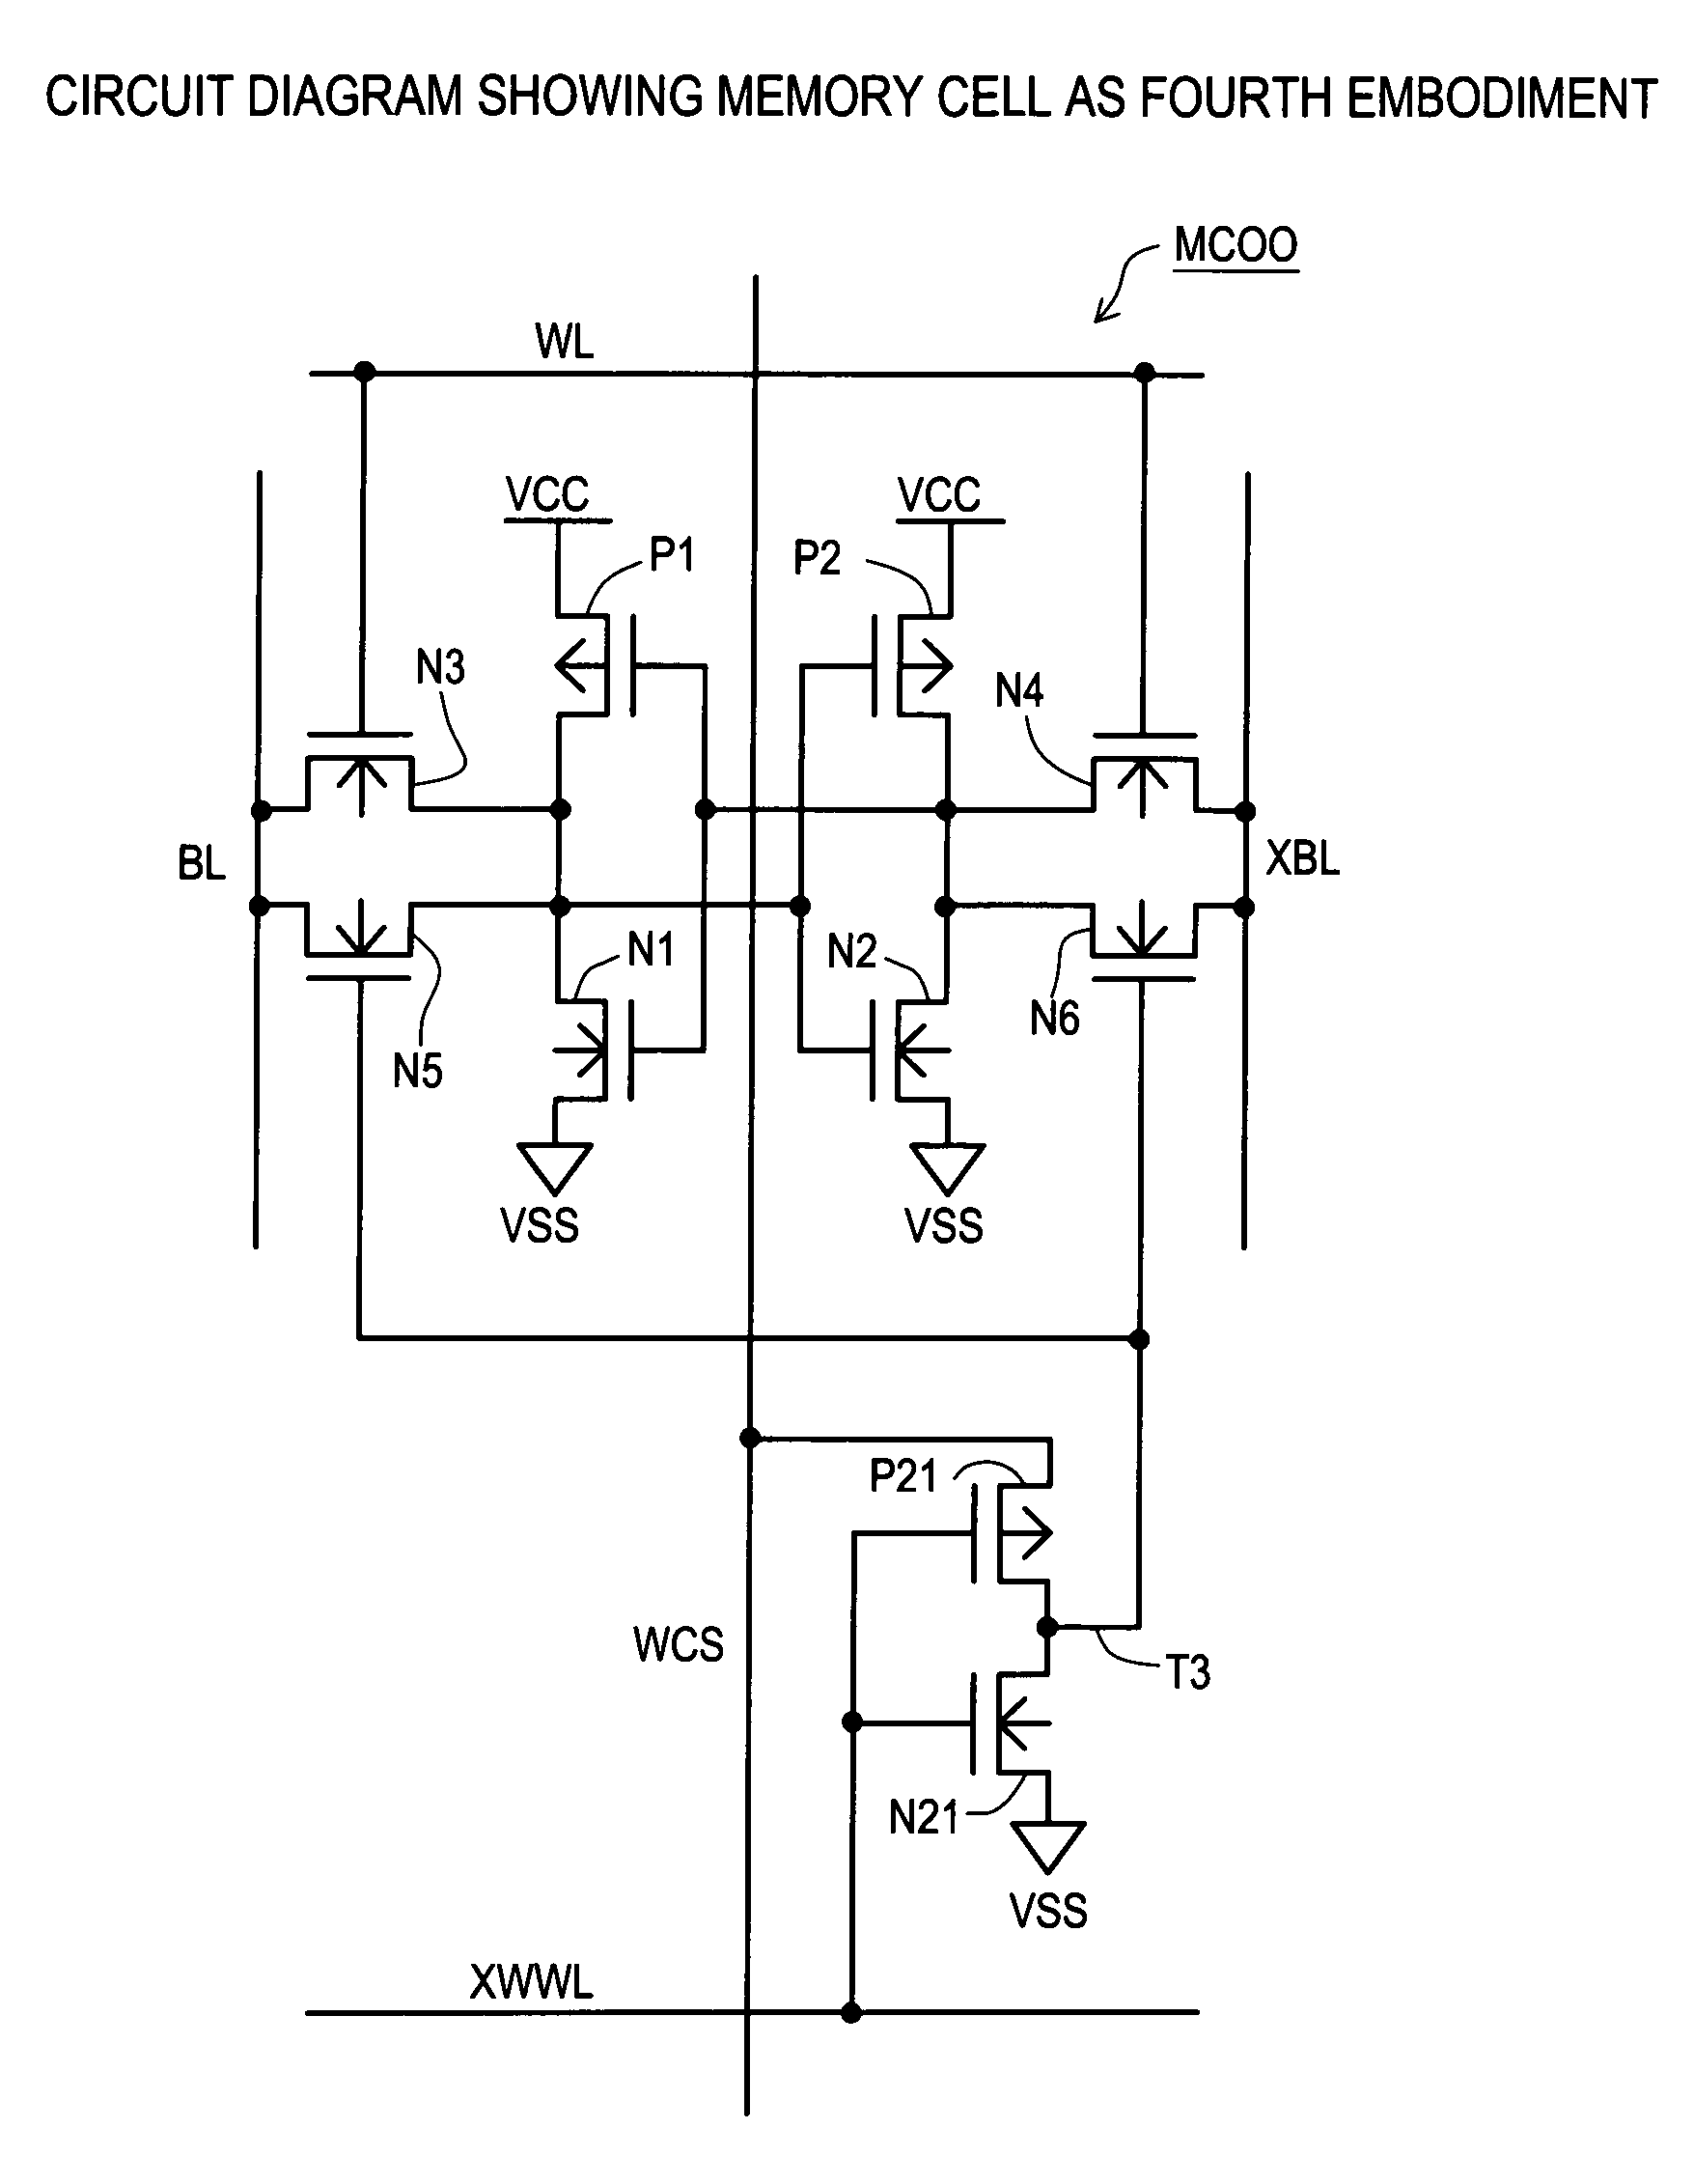 Semiconductor memory which enables reliable data writing with low supply voltage by improving the conductance via access transistors during write operation